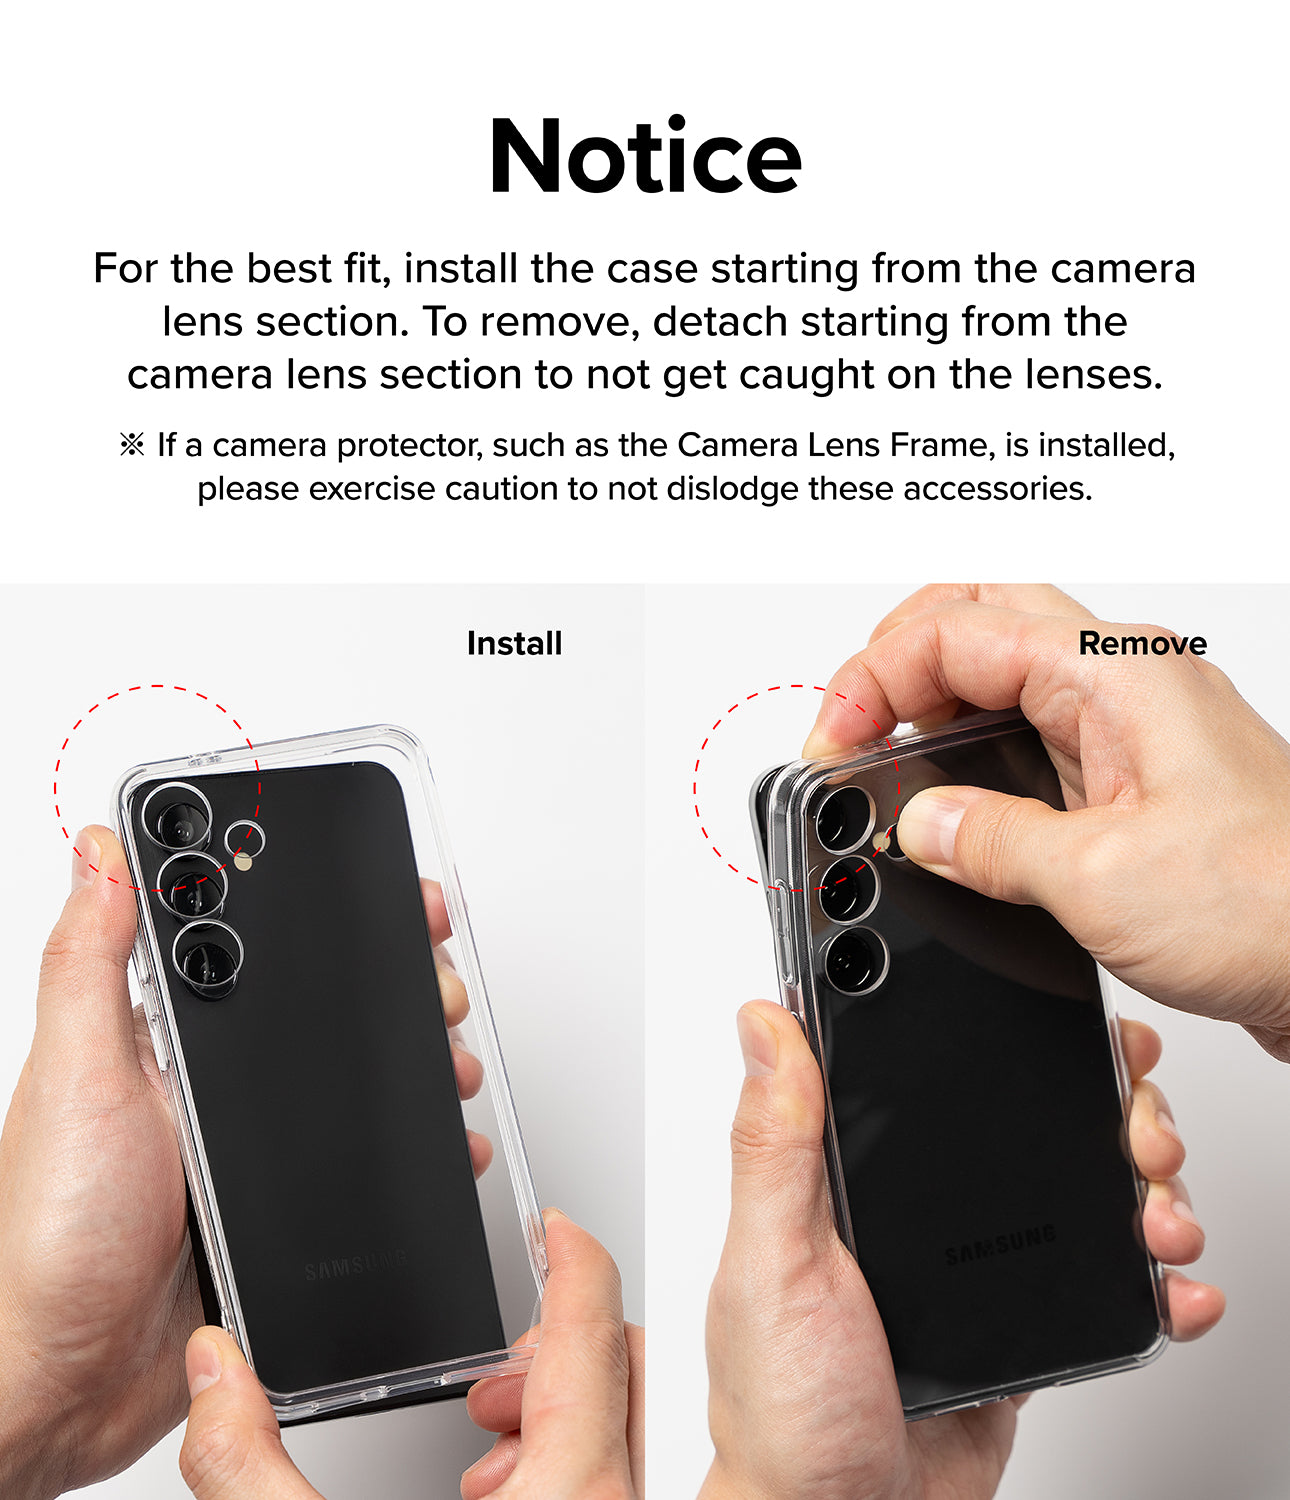 Galaxy S24 Plus Case | Fusion Design - Seoul - Notice. For the best fit, install the case starting from the camera lens section. To remove, detach starting from the camera lens section to not get caught on the lenses.